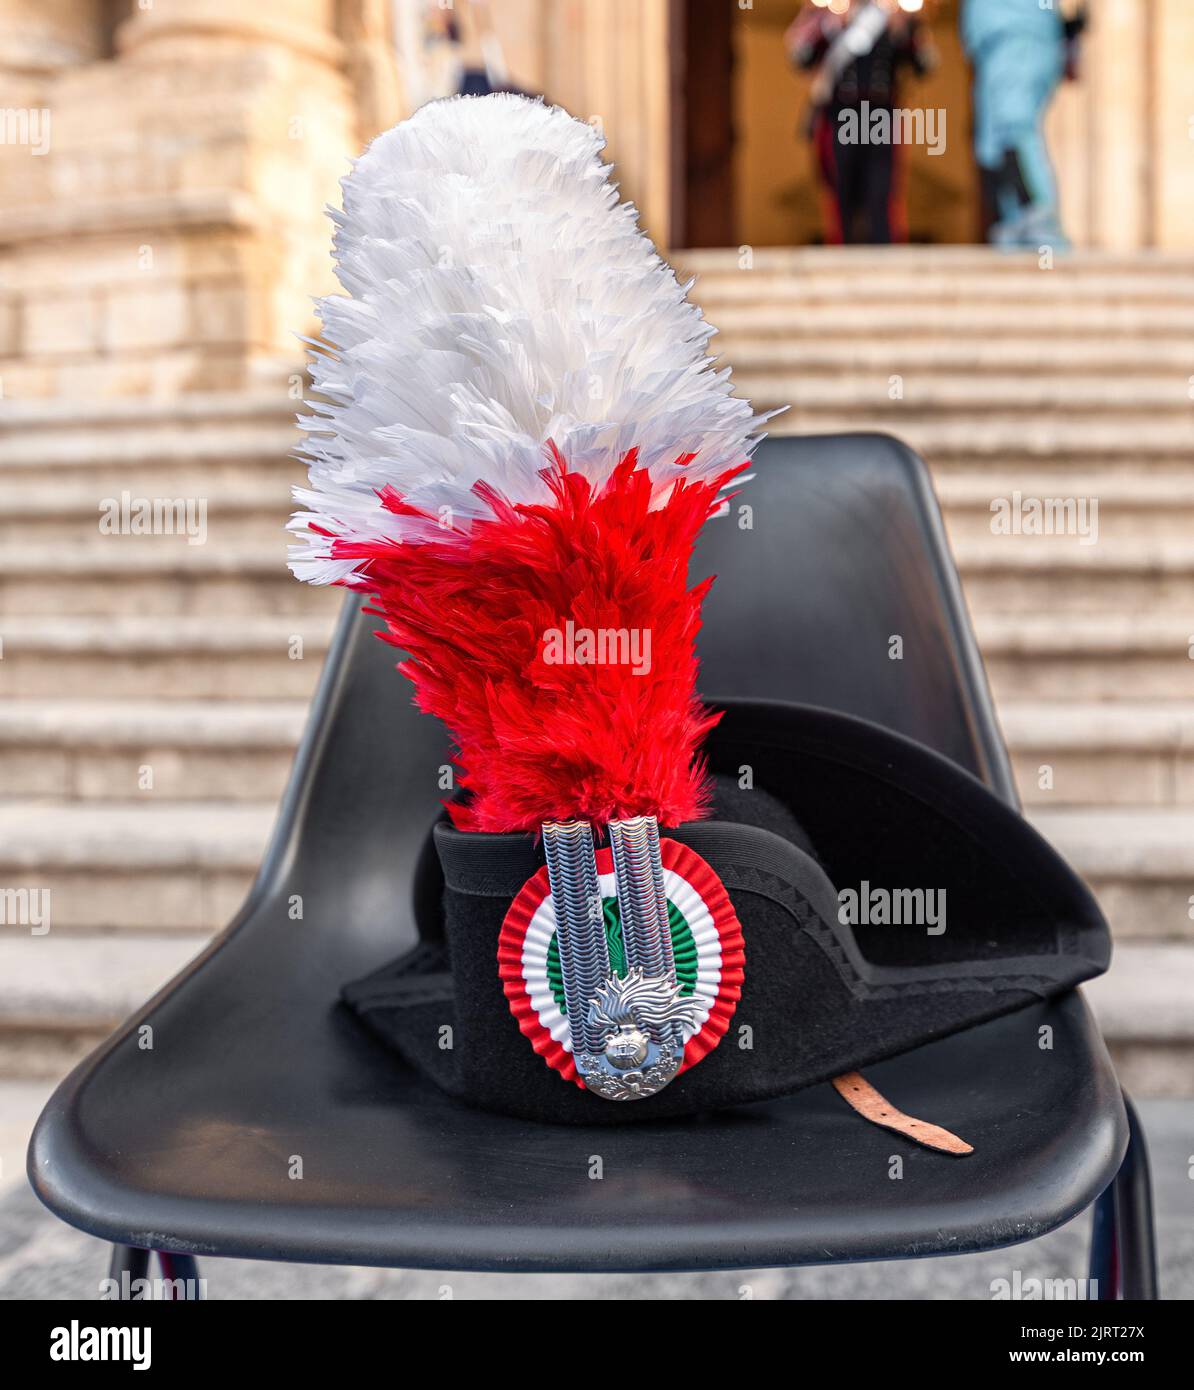 Historical Carabinieri big hat with plume and ornaments Stock Photo